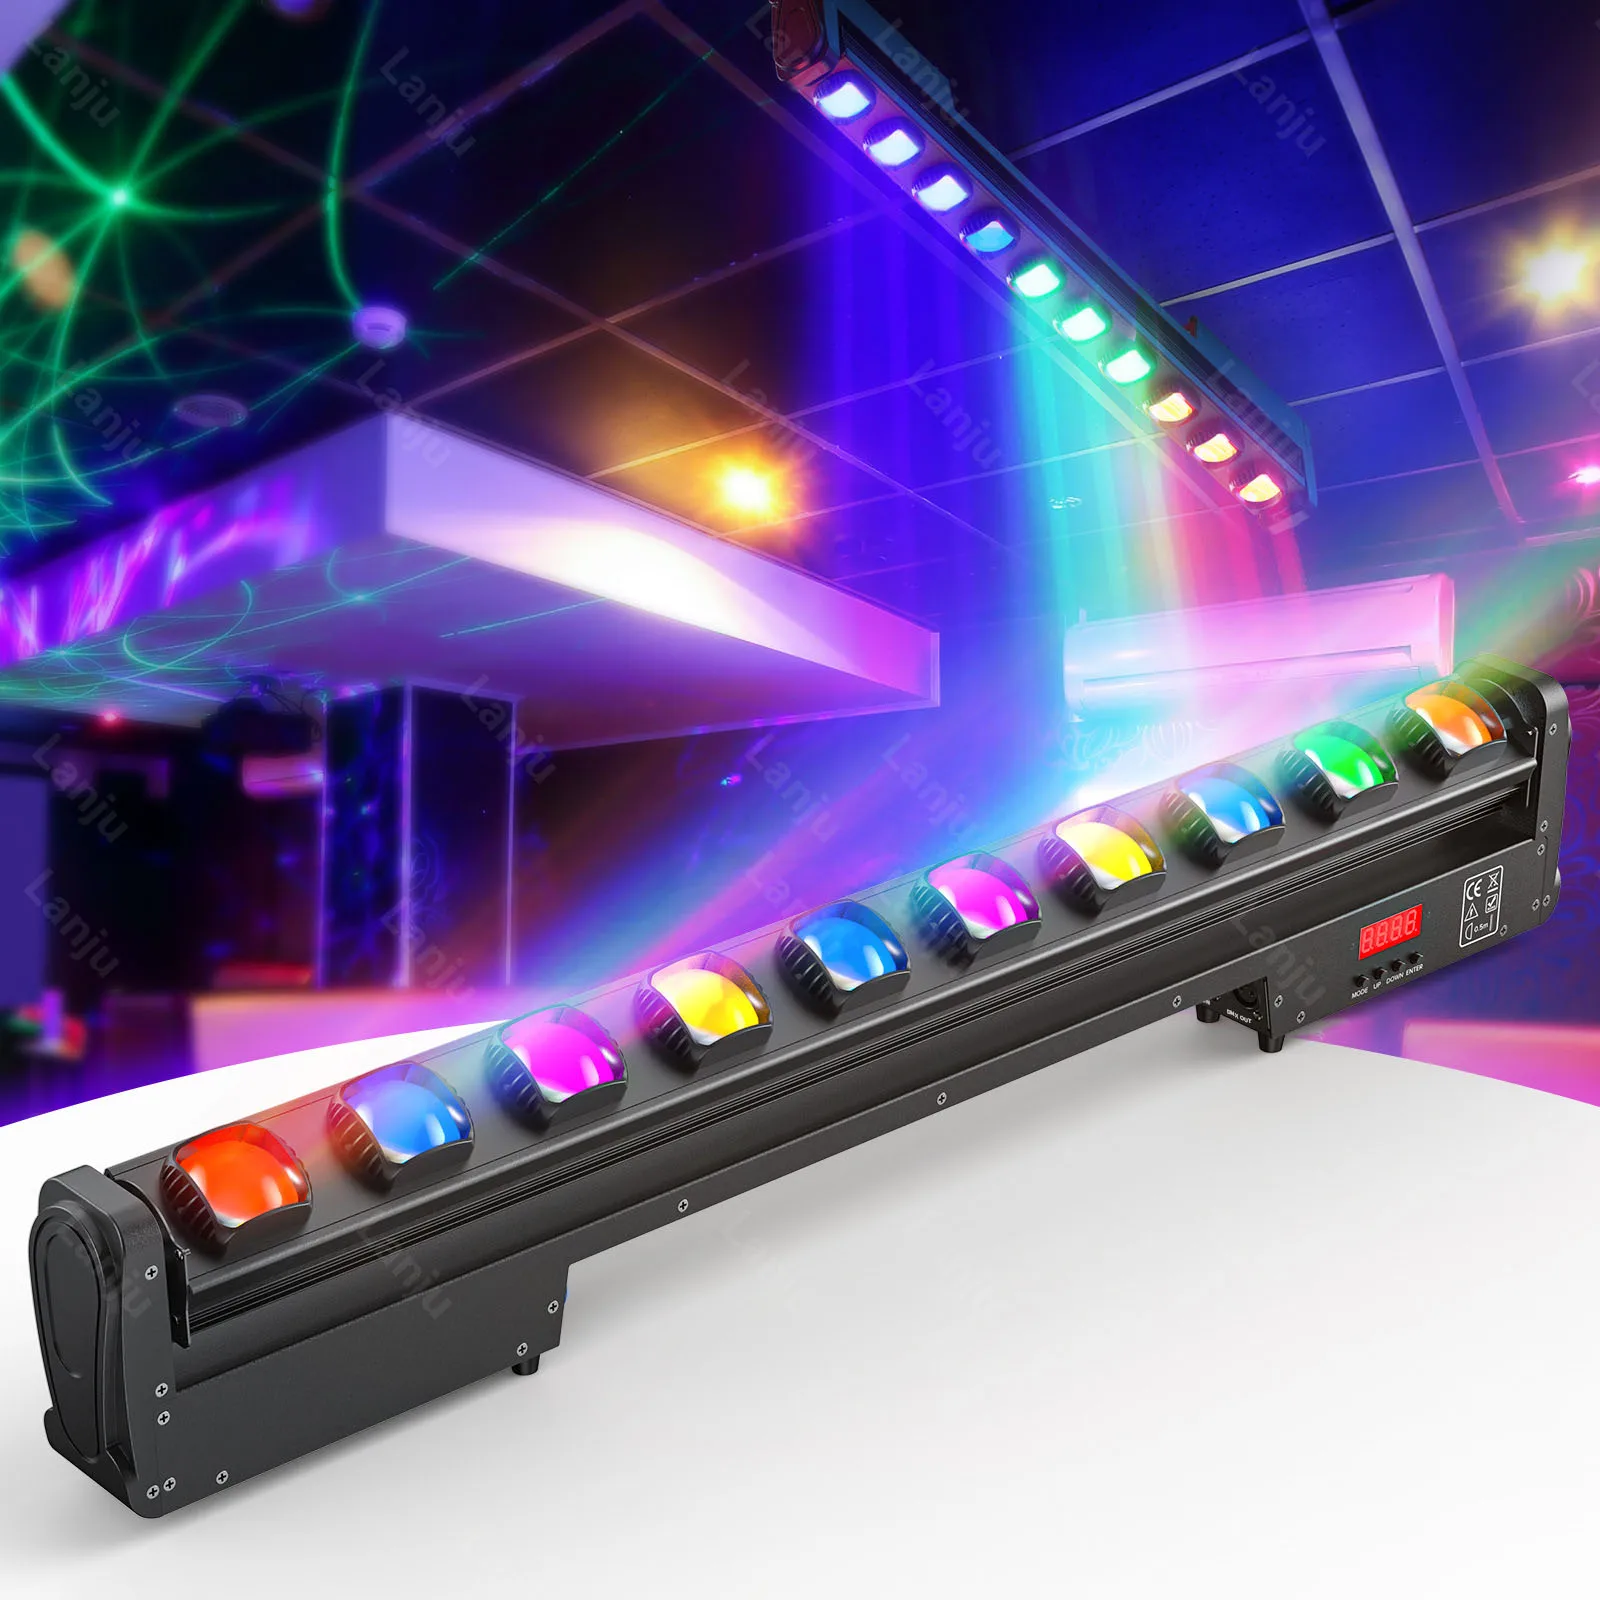 

LED 10x25W Beam Moving Head Light DMX512 Full-Color 4In1 RGBW Dyeing Lights For Home Parties Dj Disco Wedding Wash The Wall Lamp